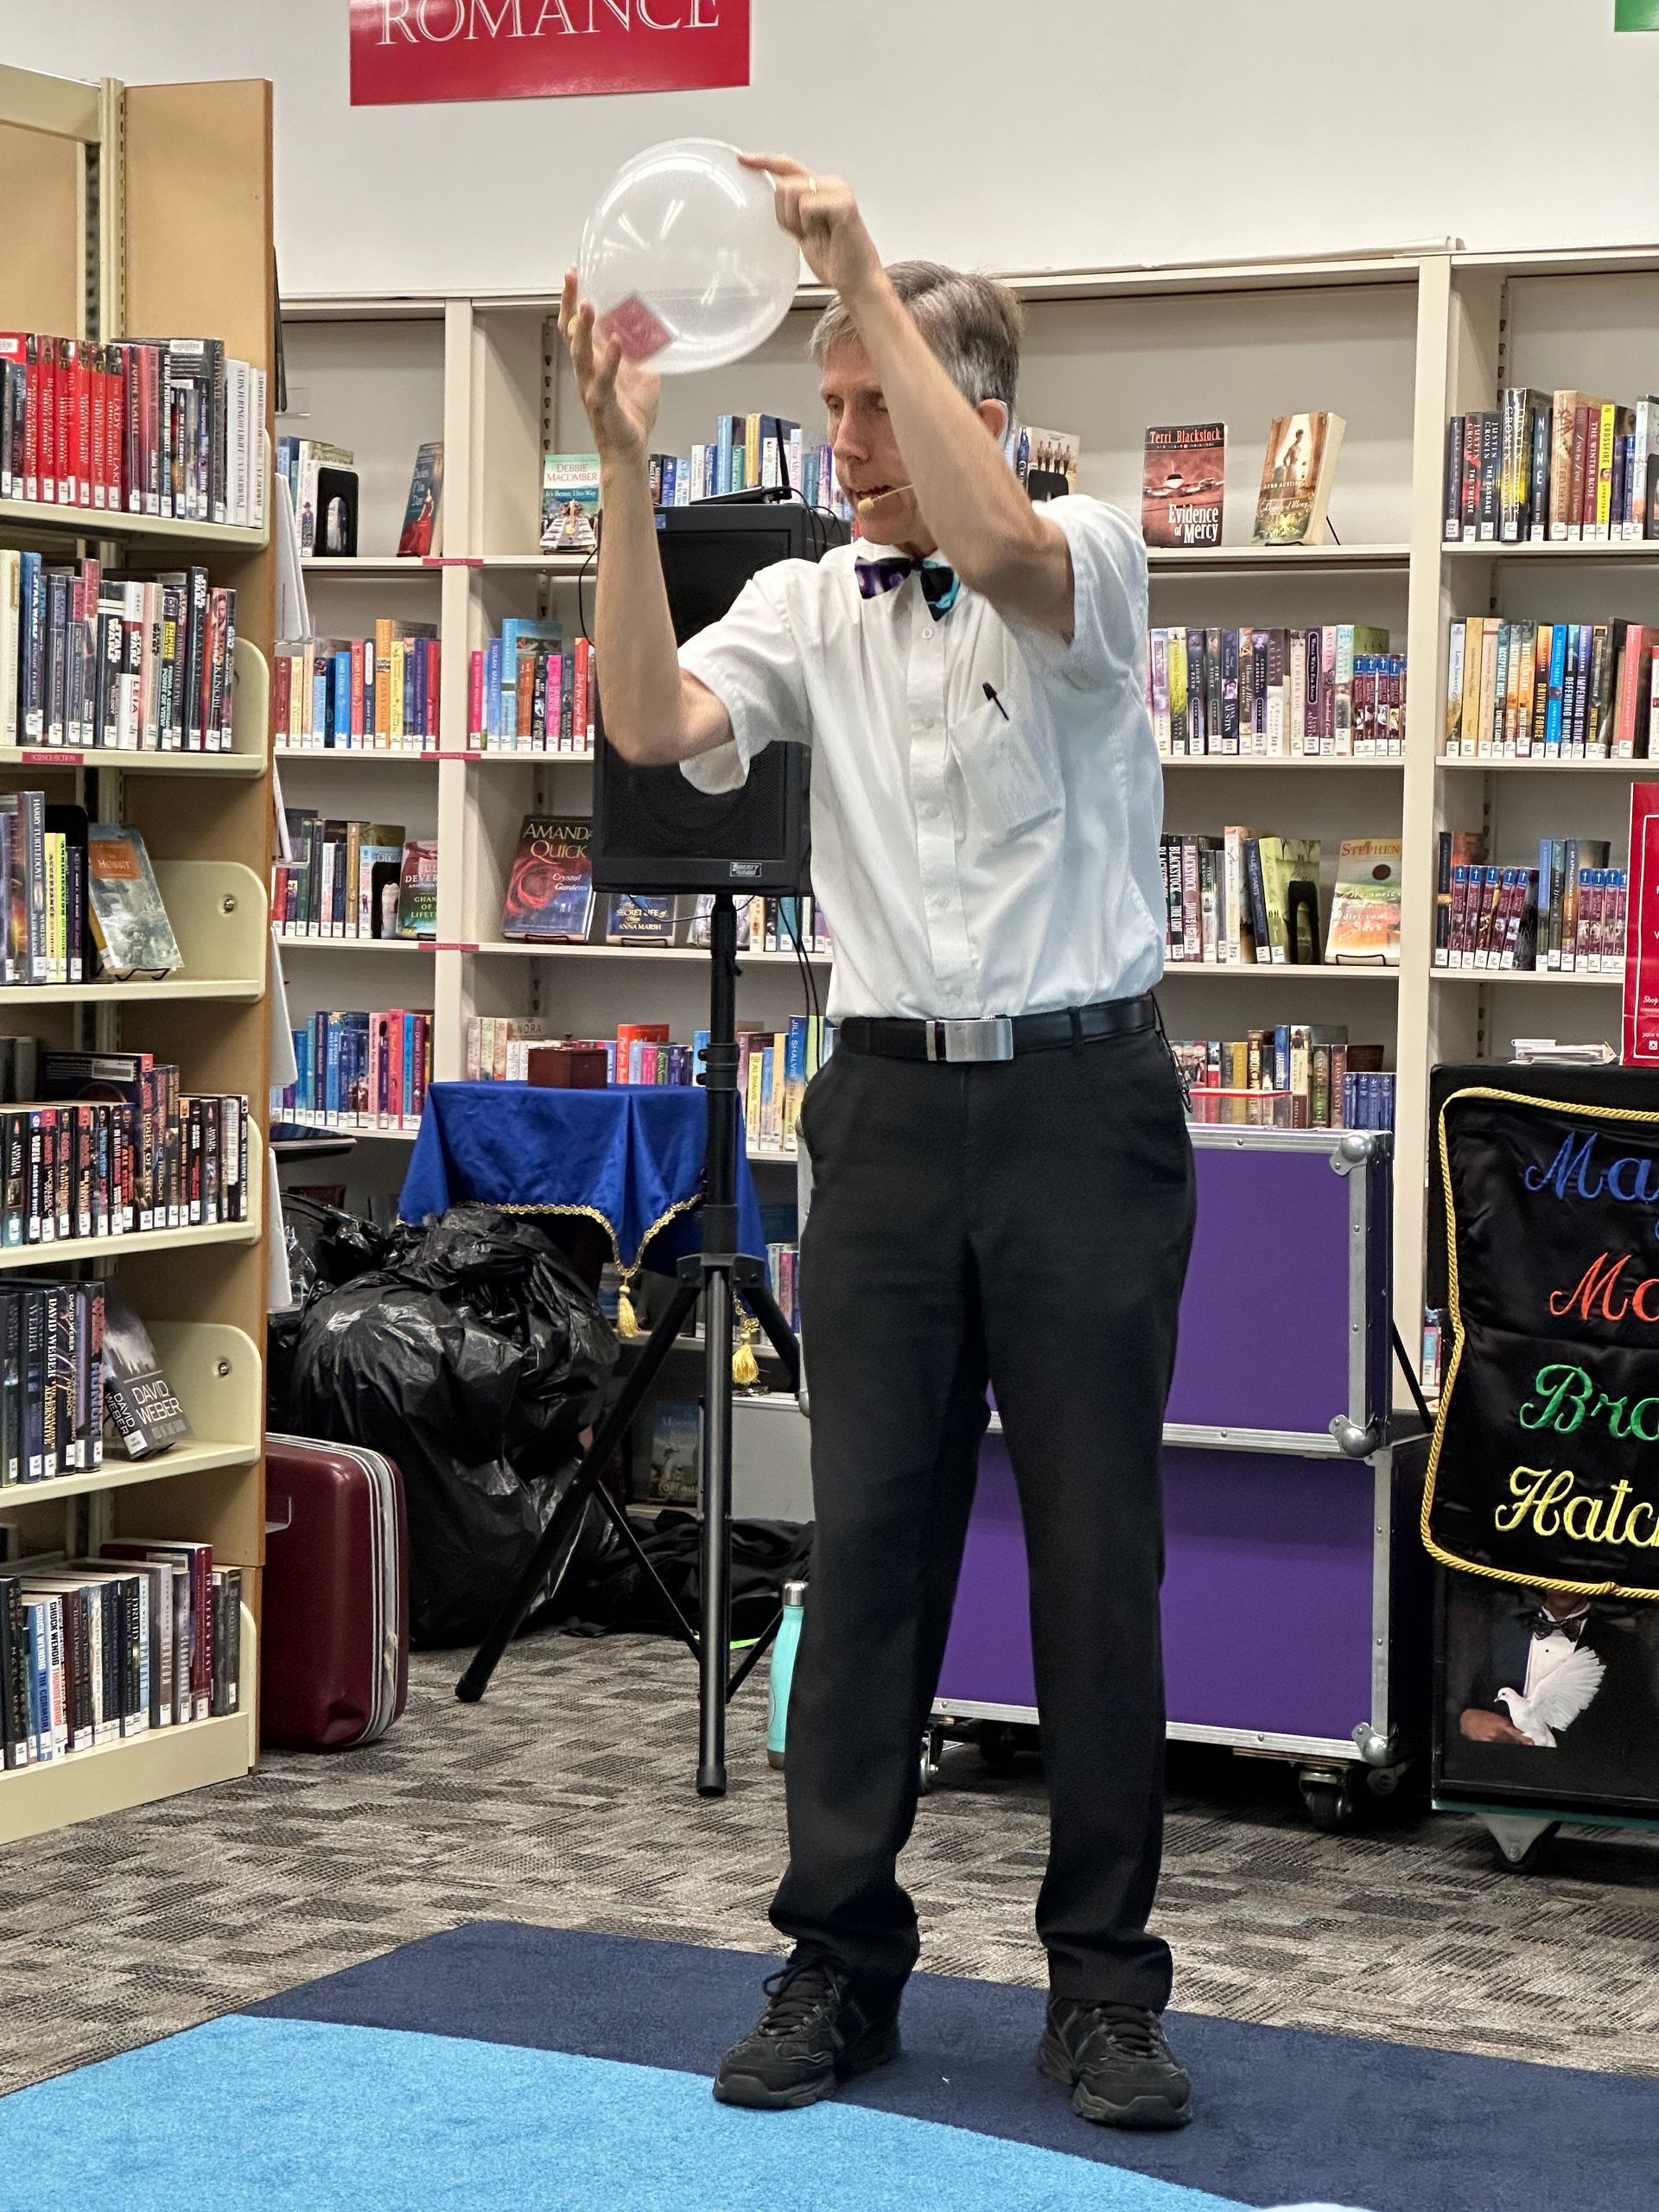 A man in a white shirt and black pants is holding a plastic container in a library.